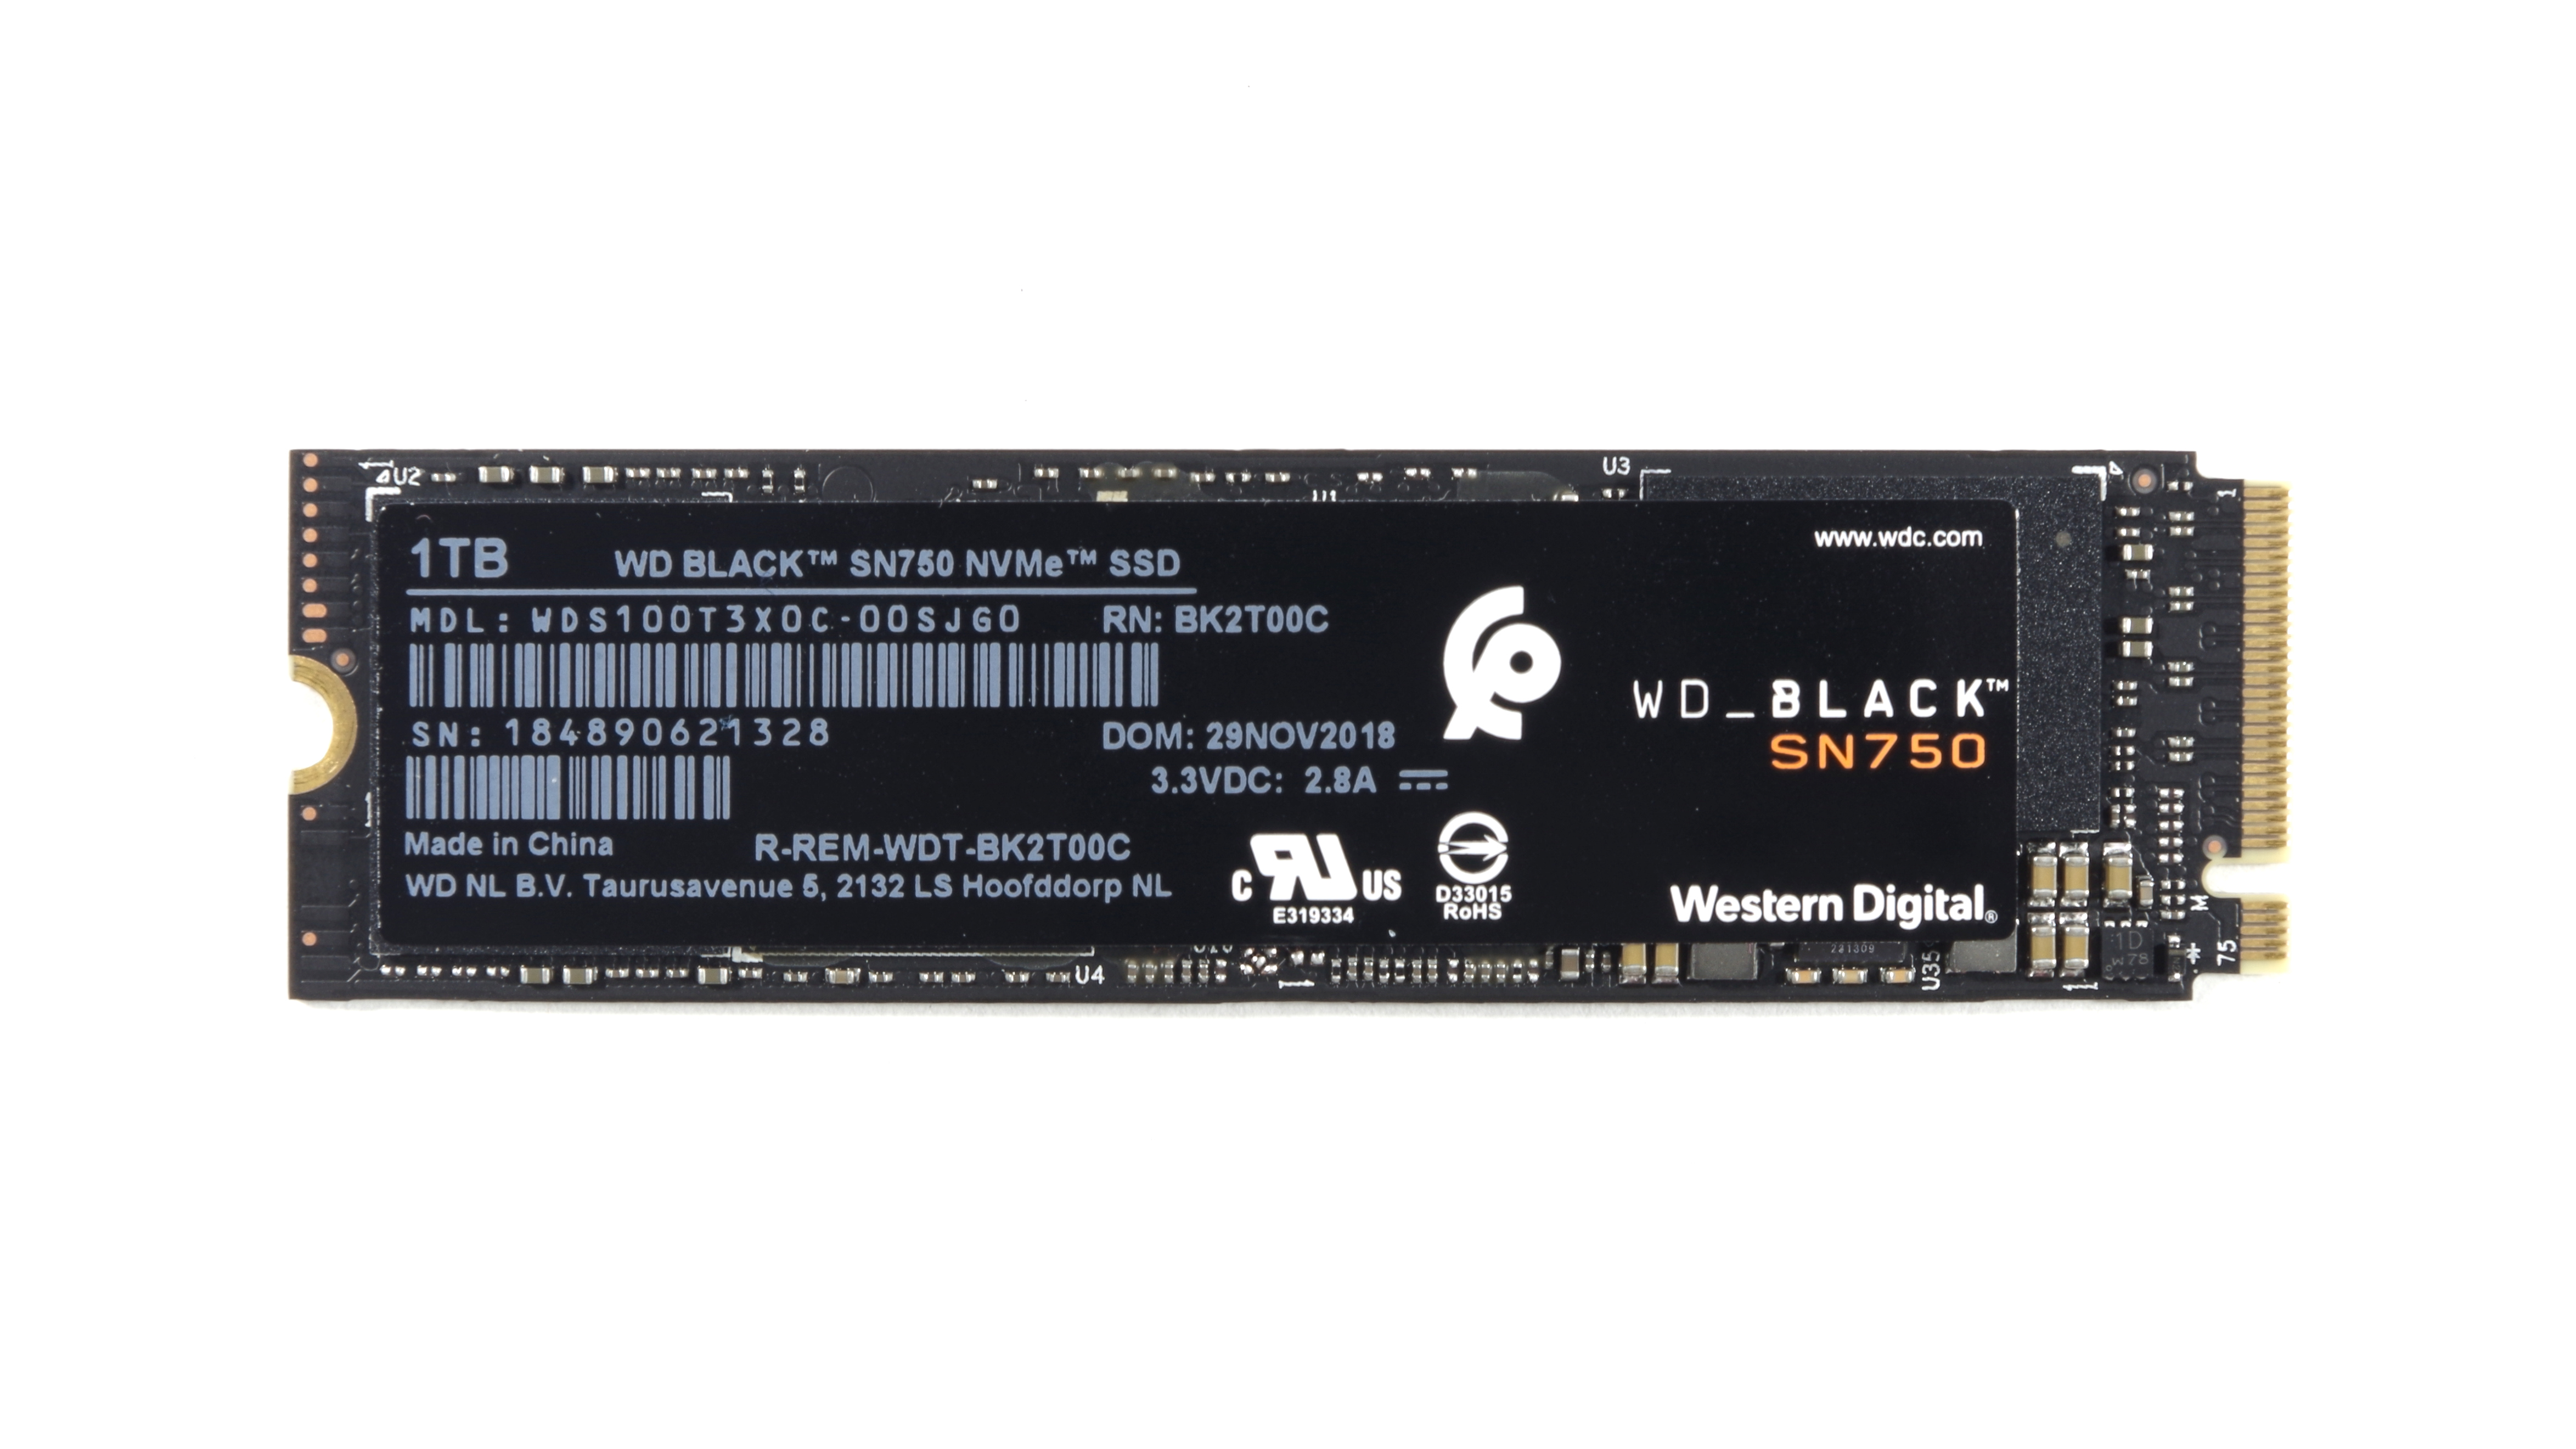 Transformer pronunciation Persuasion Conclusion - The Western Digital WD Black SN750 SSD Review: Why Fix What  Isn't Broken?